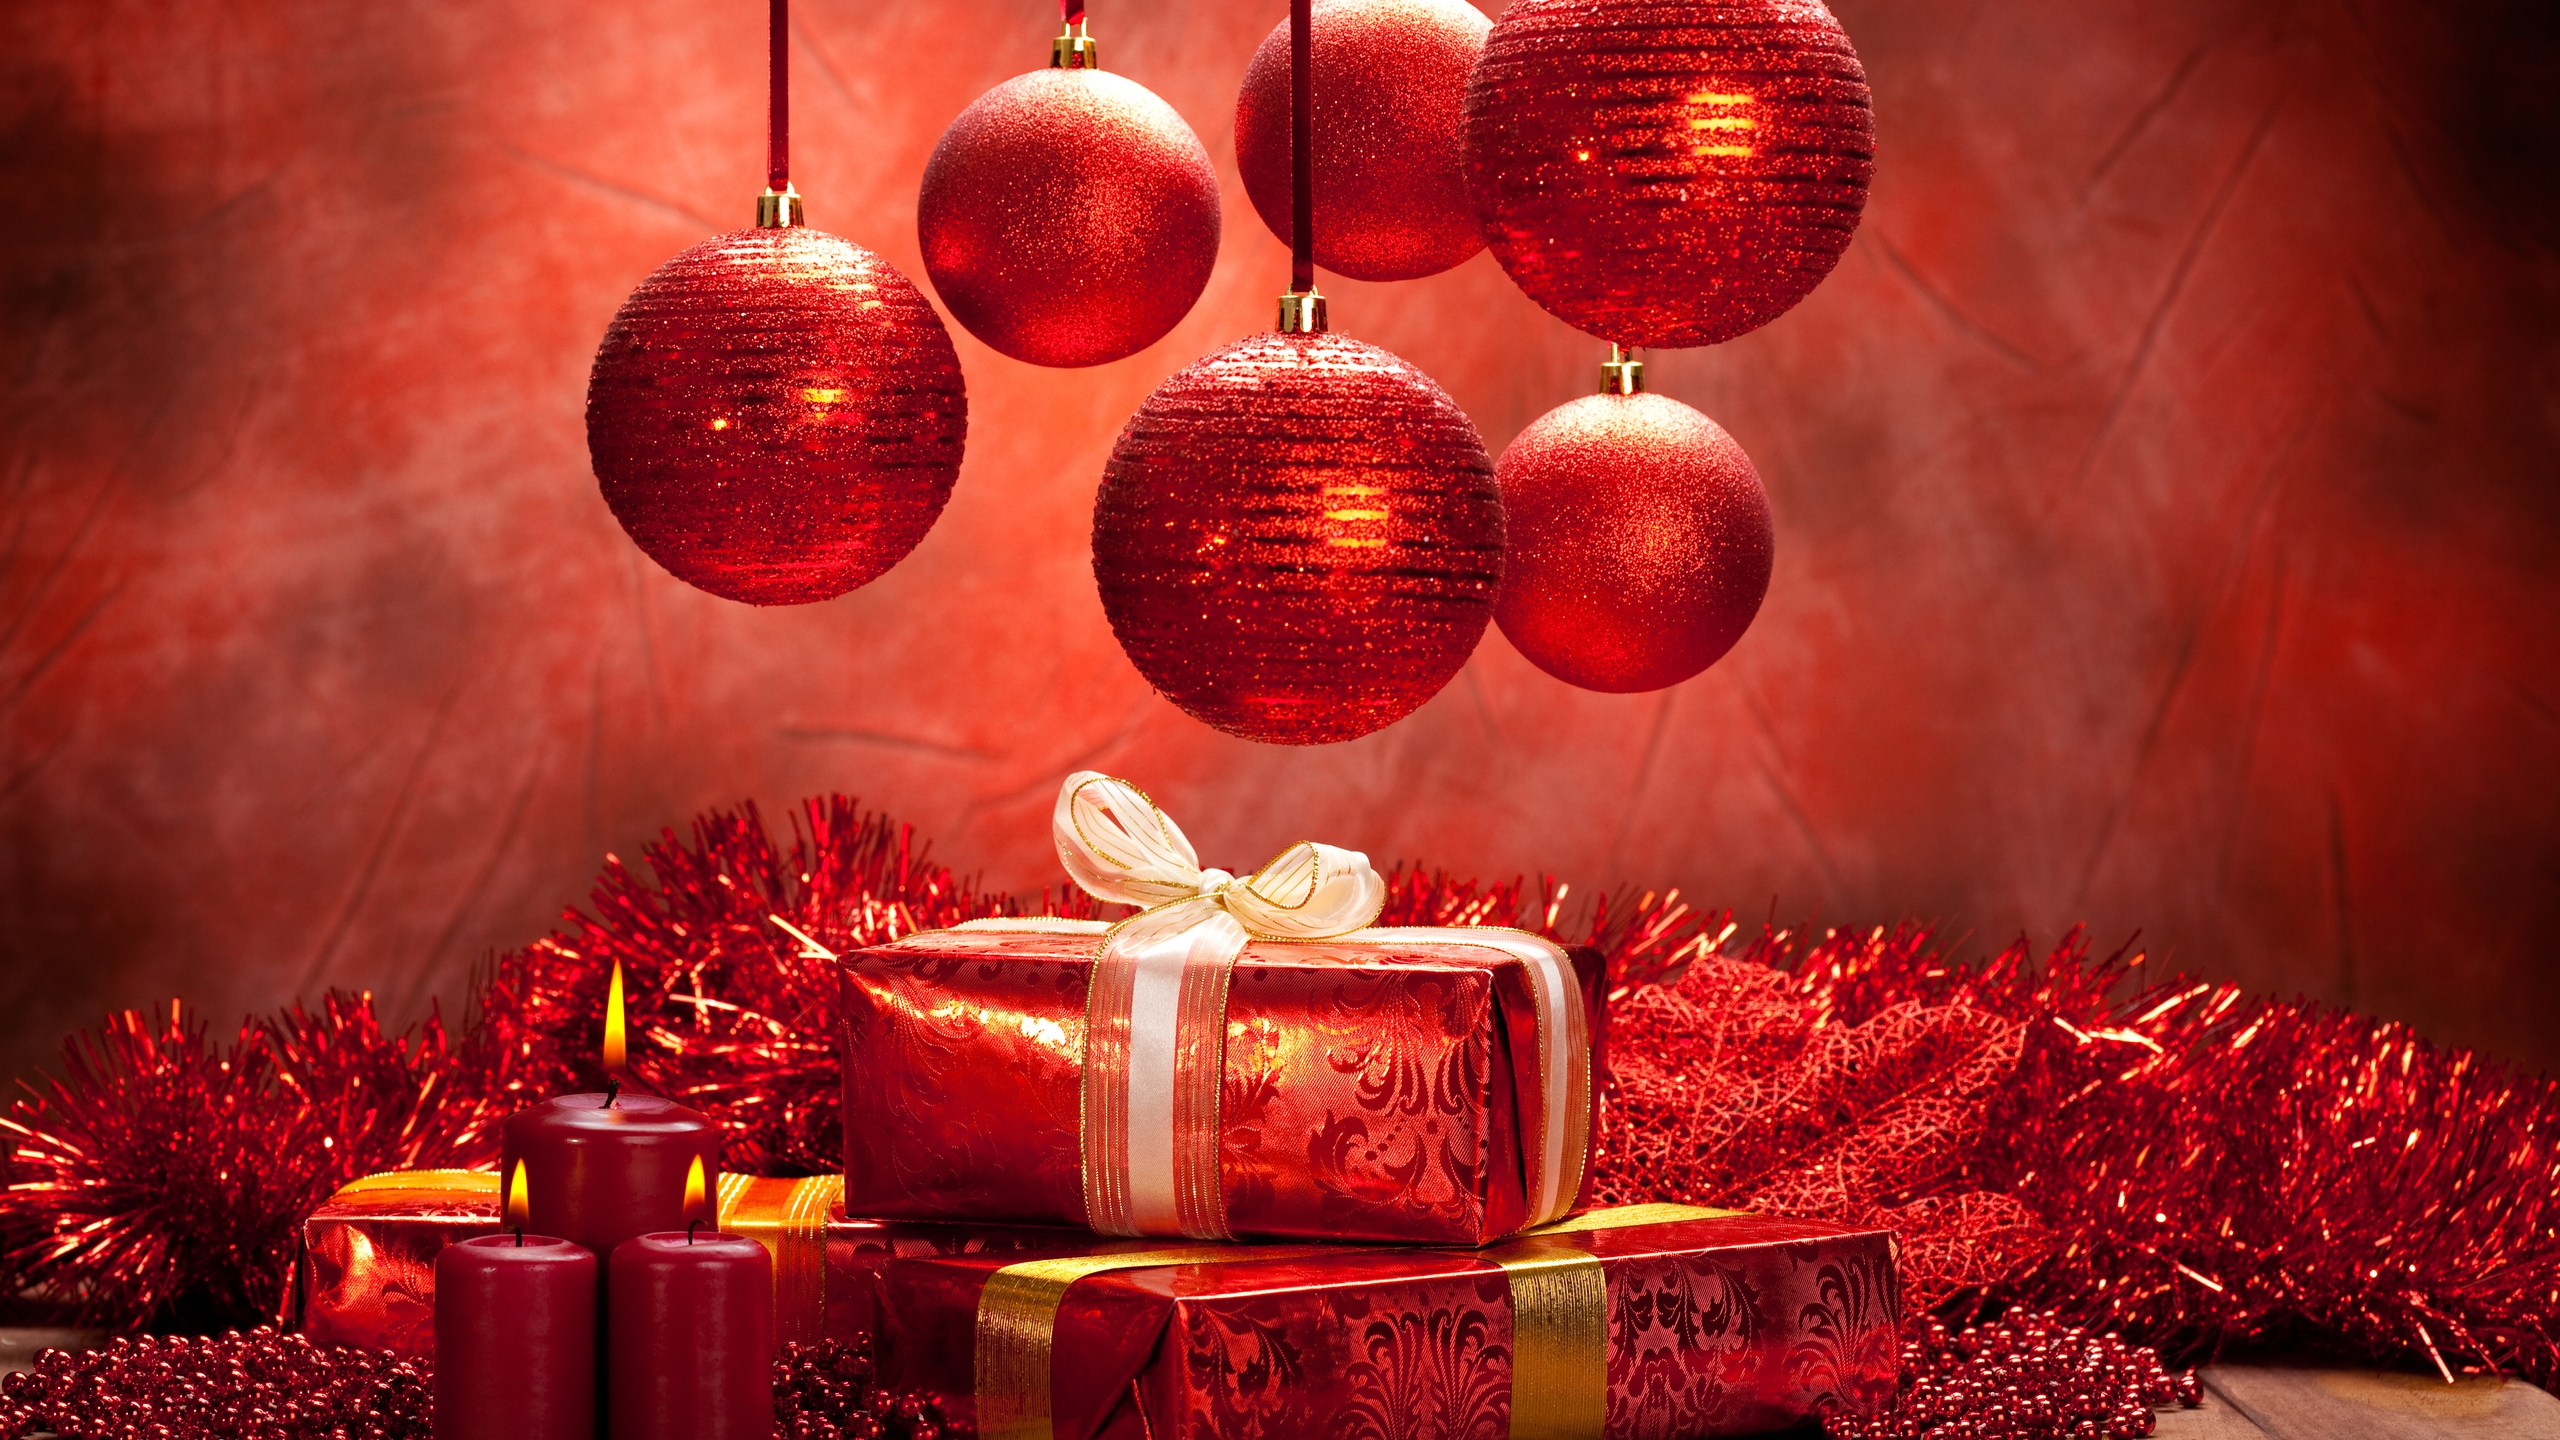 Christmas Balls and Gifts for 2560x1440 HDTV resolution